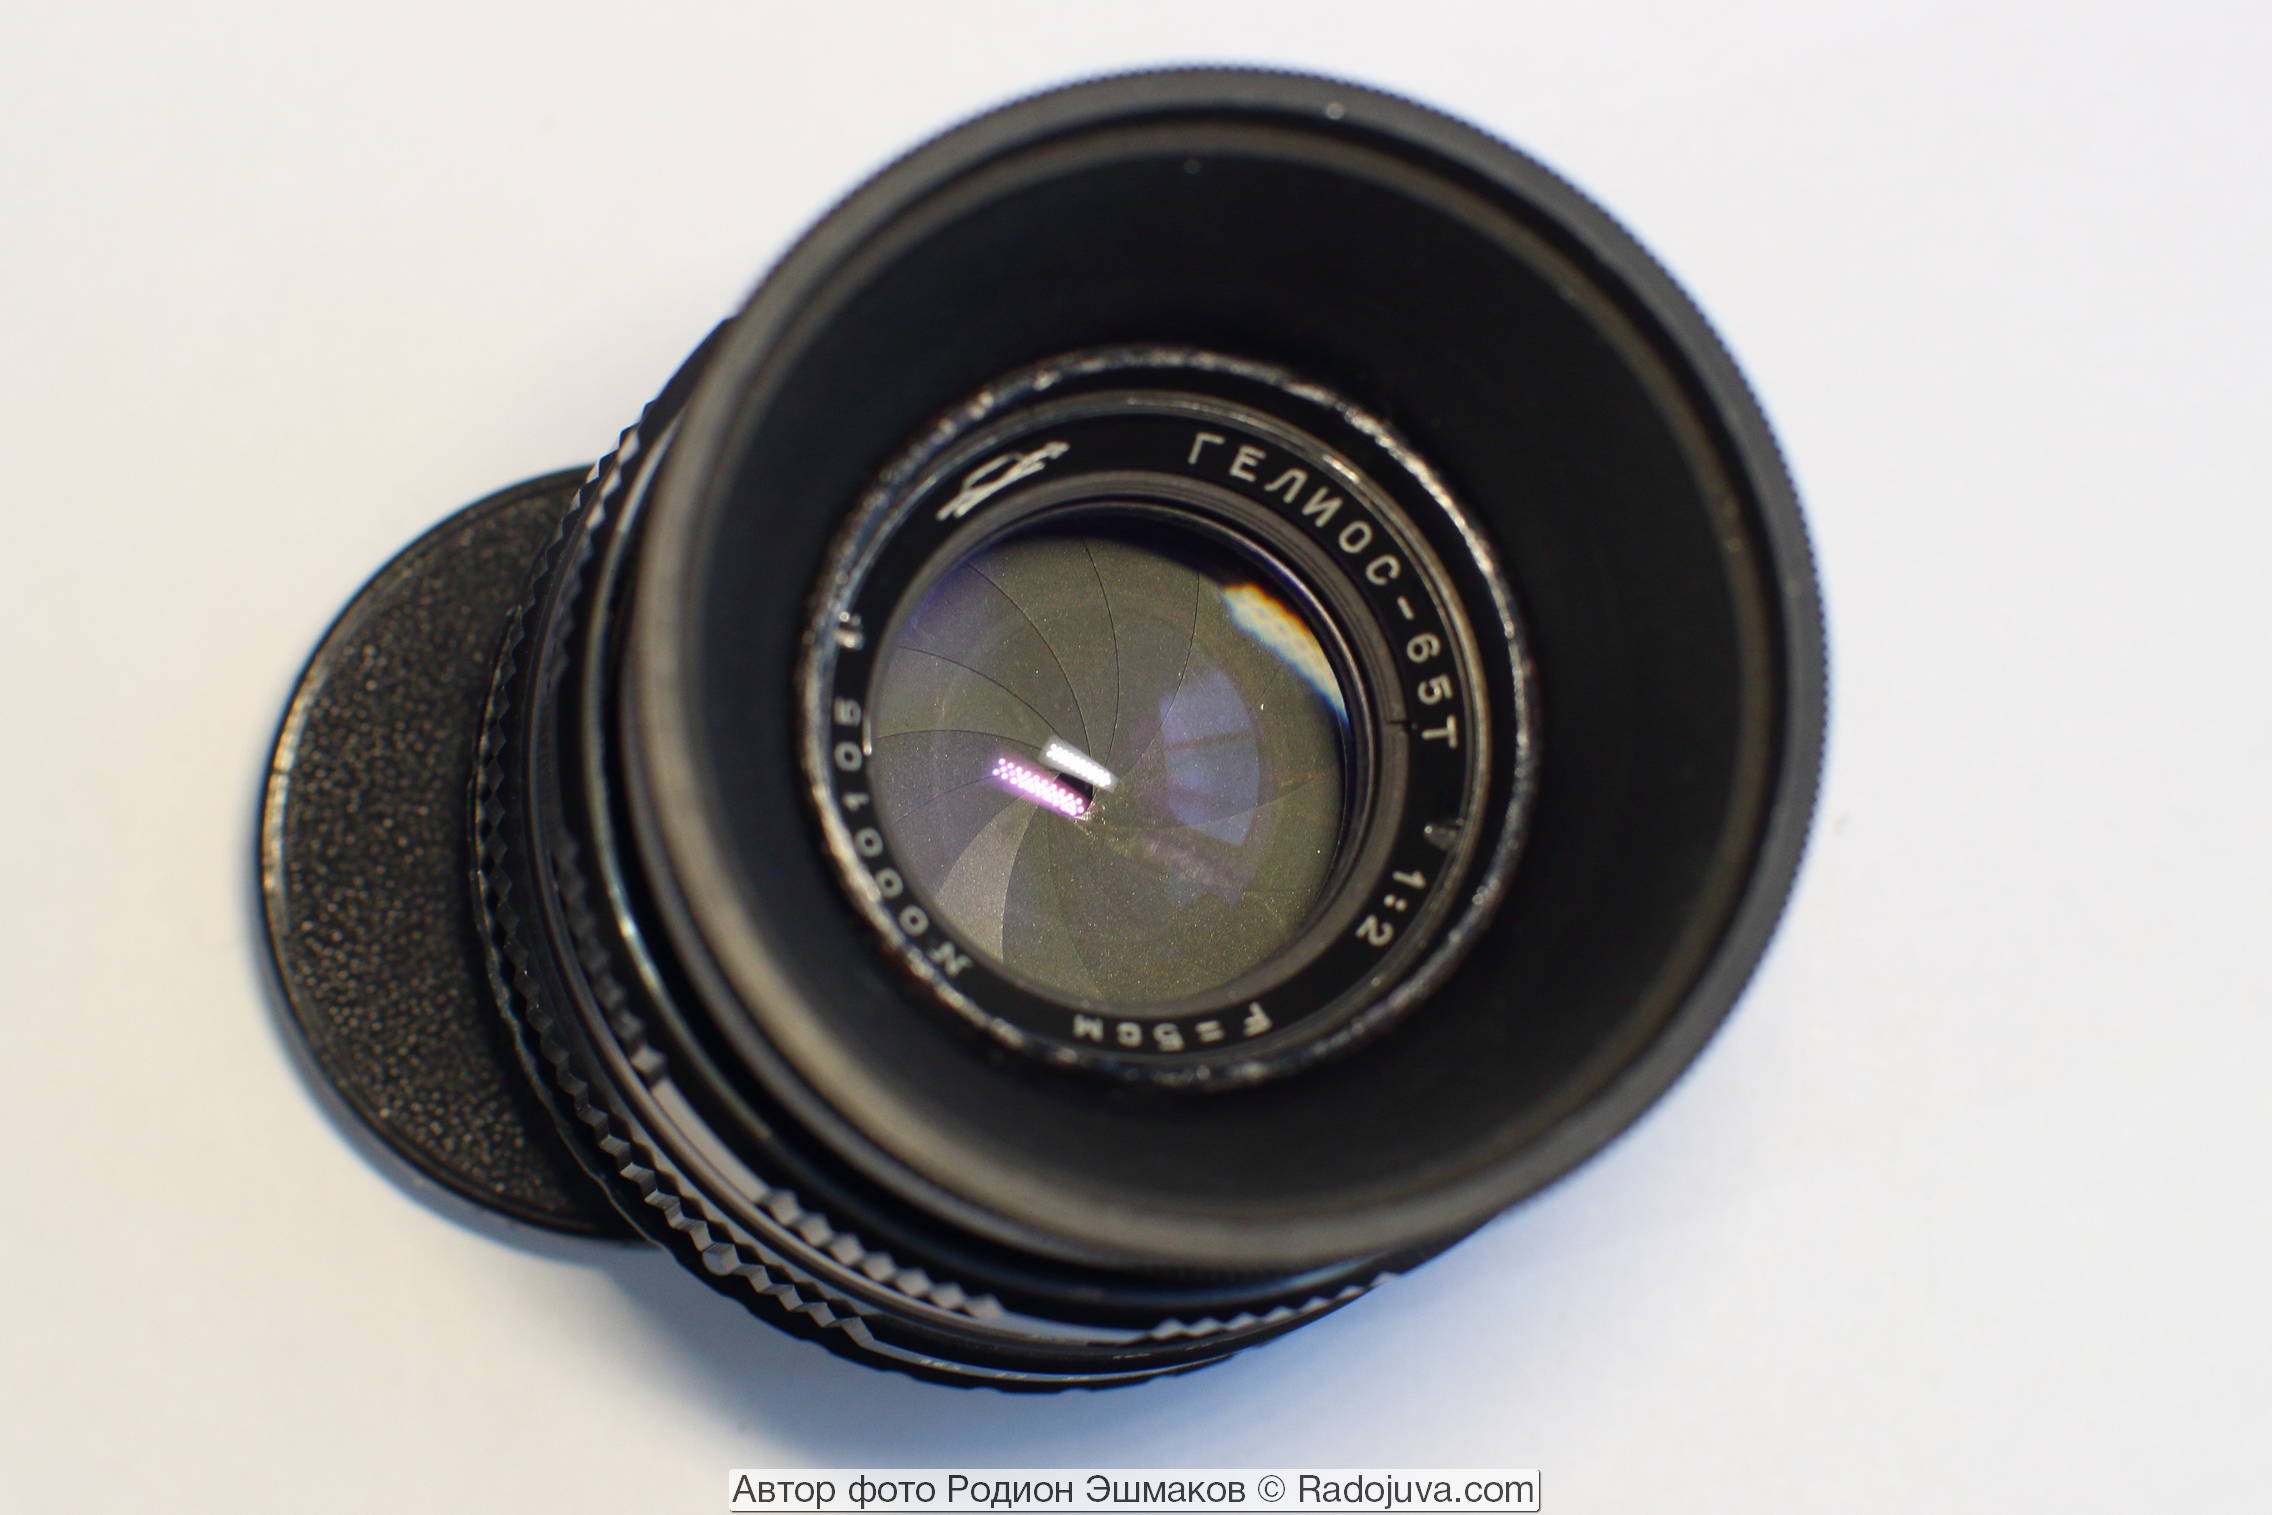 View of the Helios-65T diaphragm.